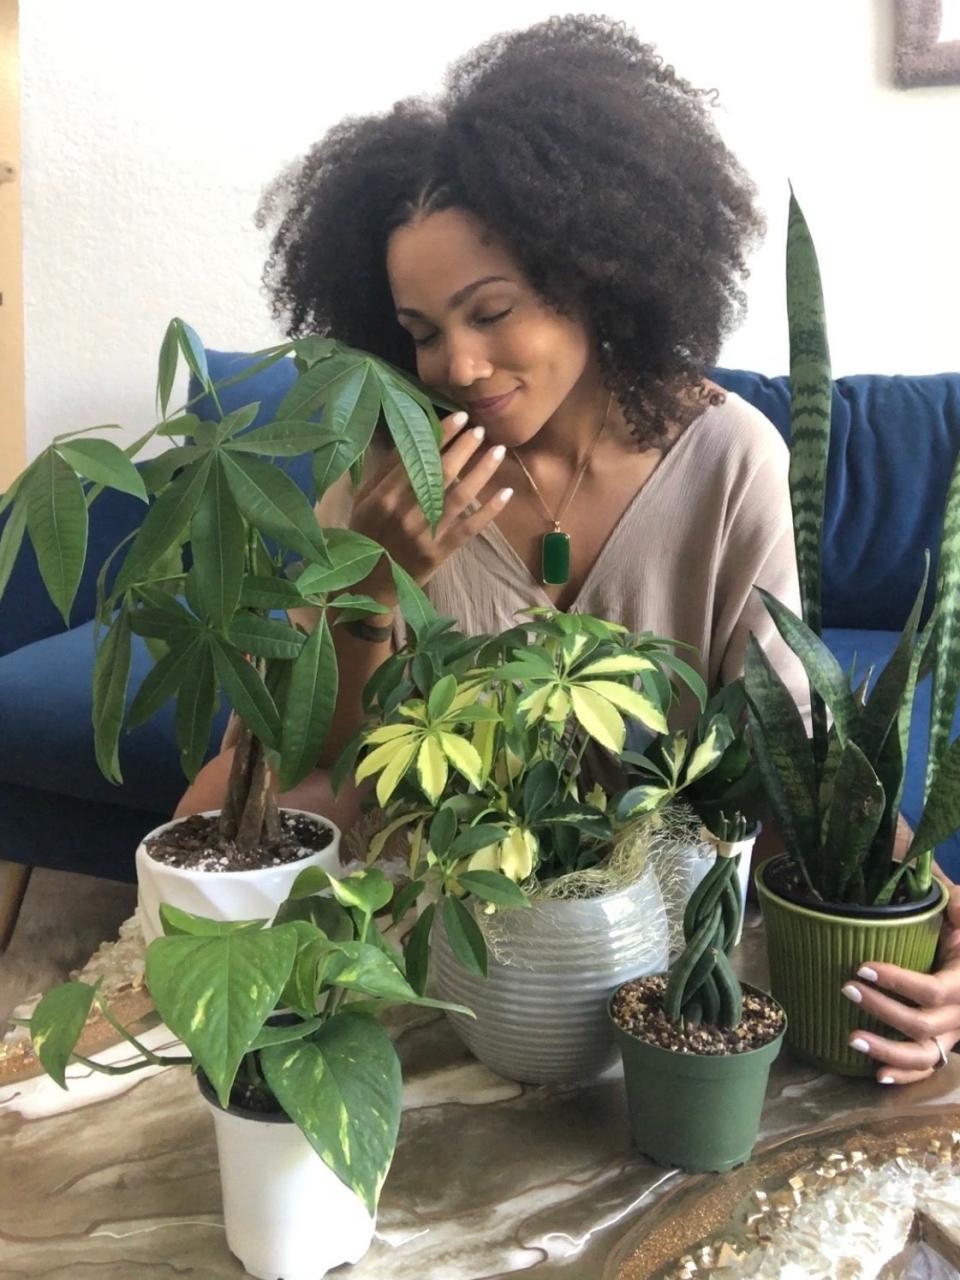 “Plant care is much like hair care, it requires deep listening, patience, consistency and loving communication. #ProudPlantMom"